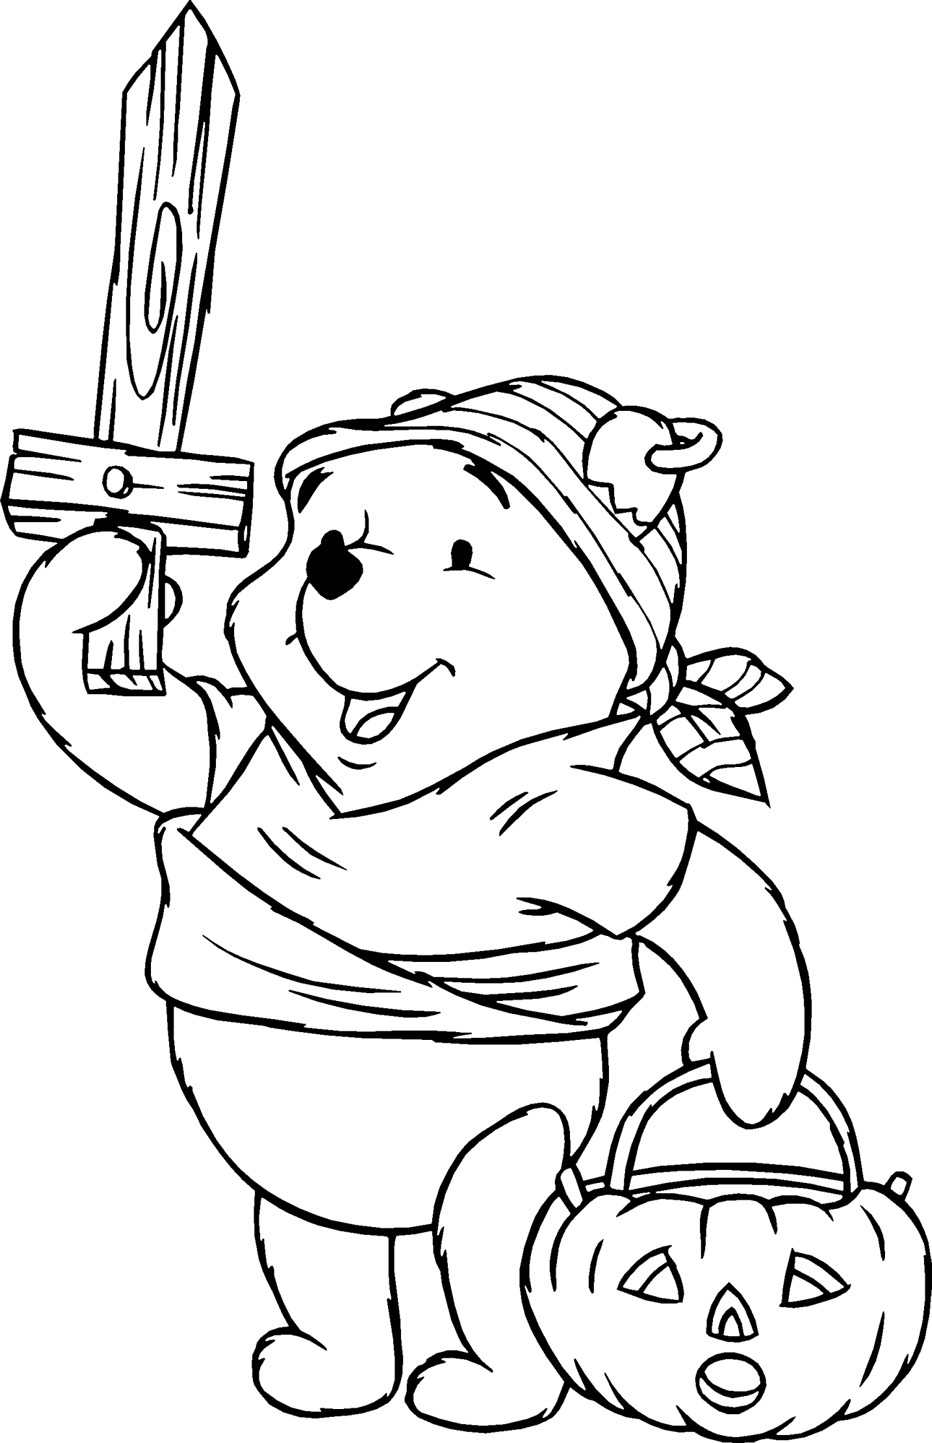  A Coloring Pages For Halloween 4